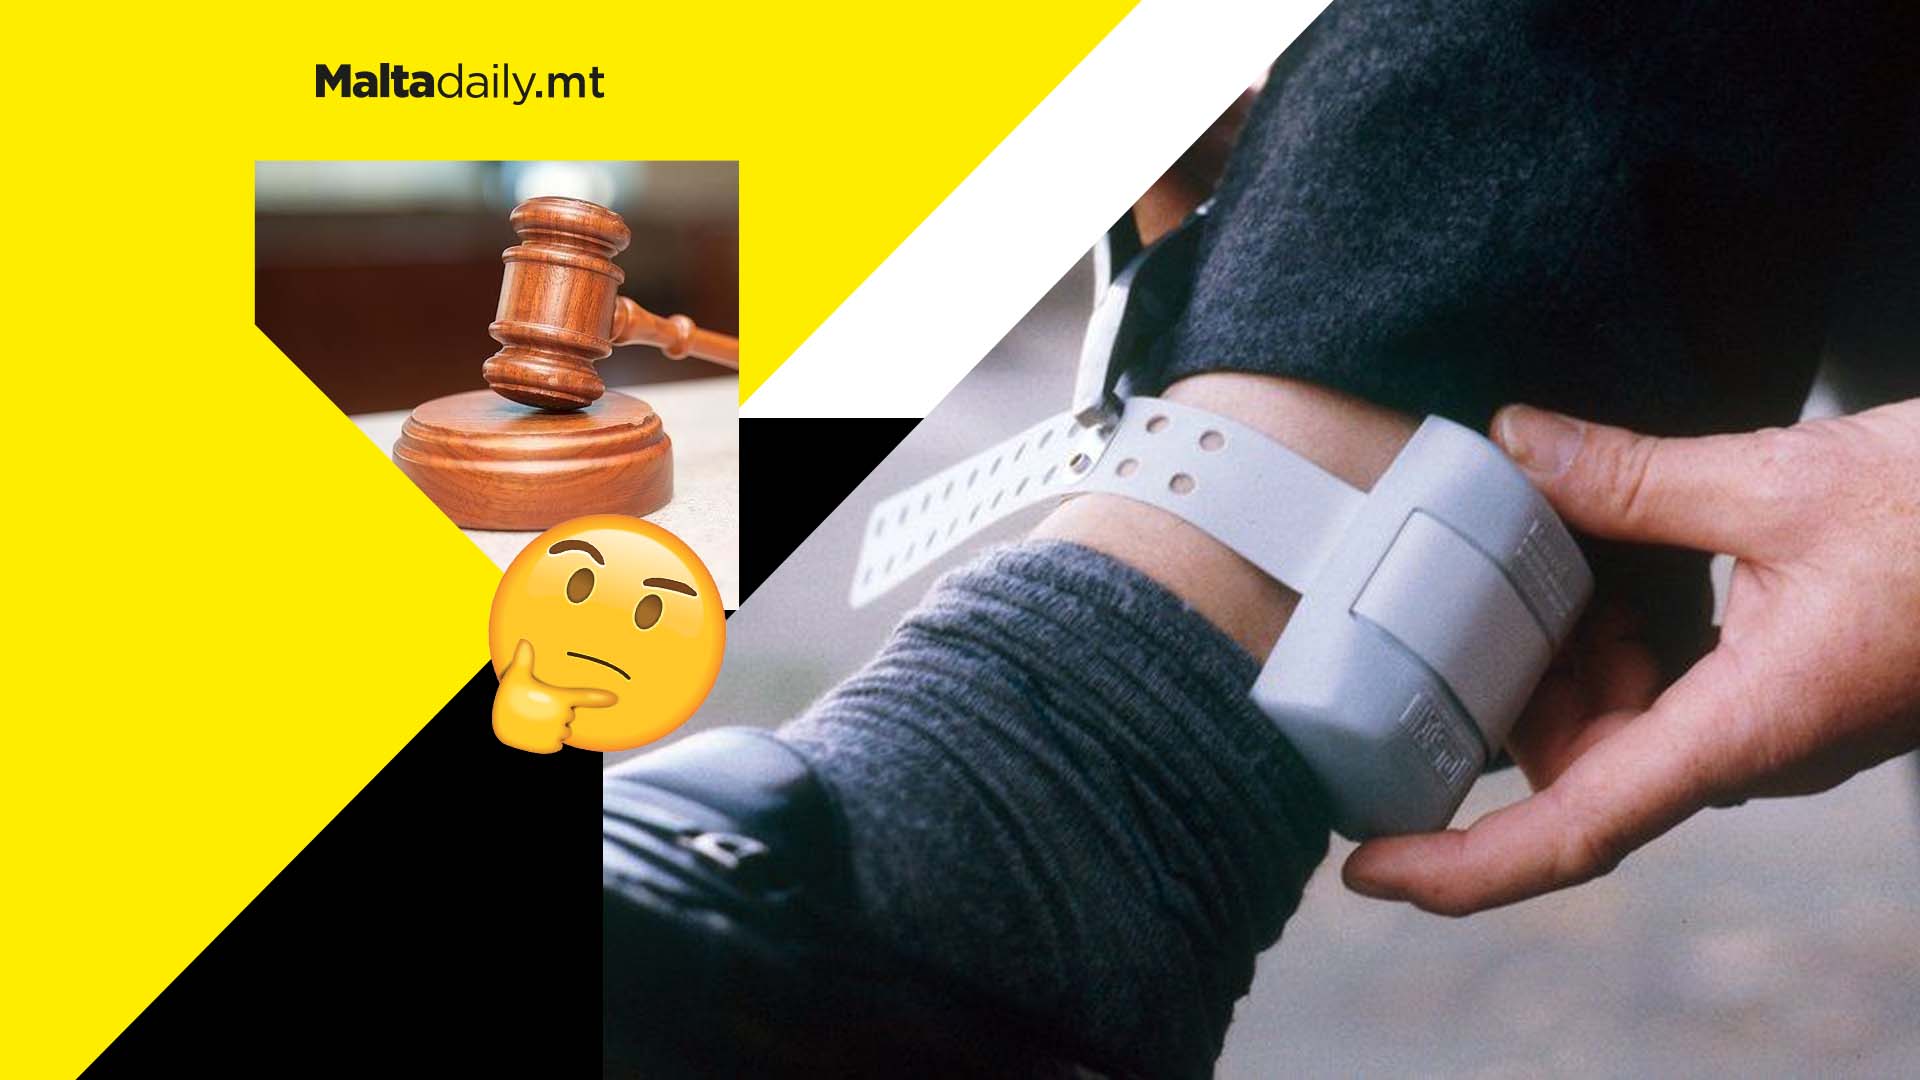 Should Malta use electronic tags even in cases of bail?